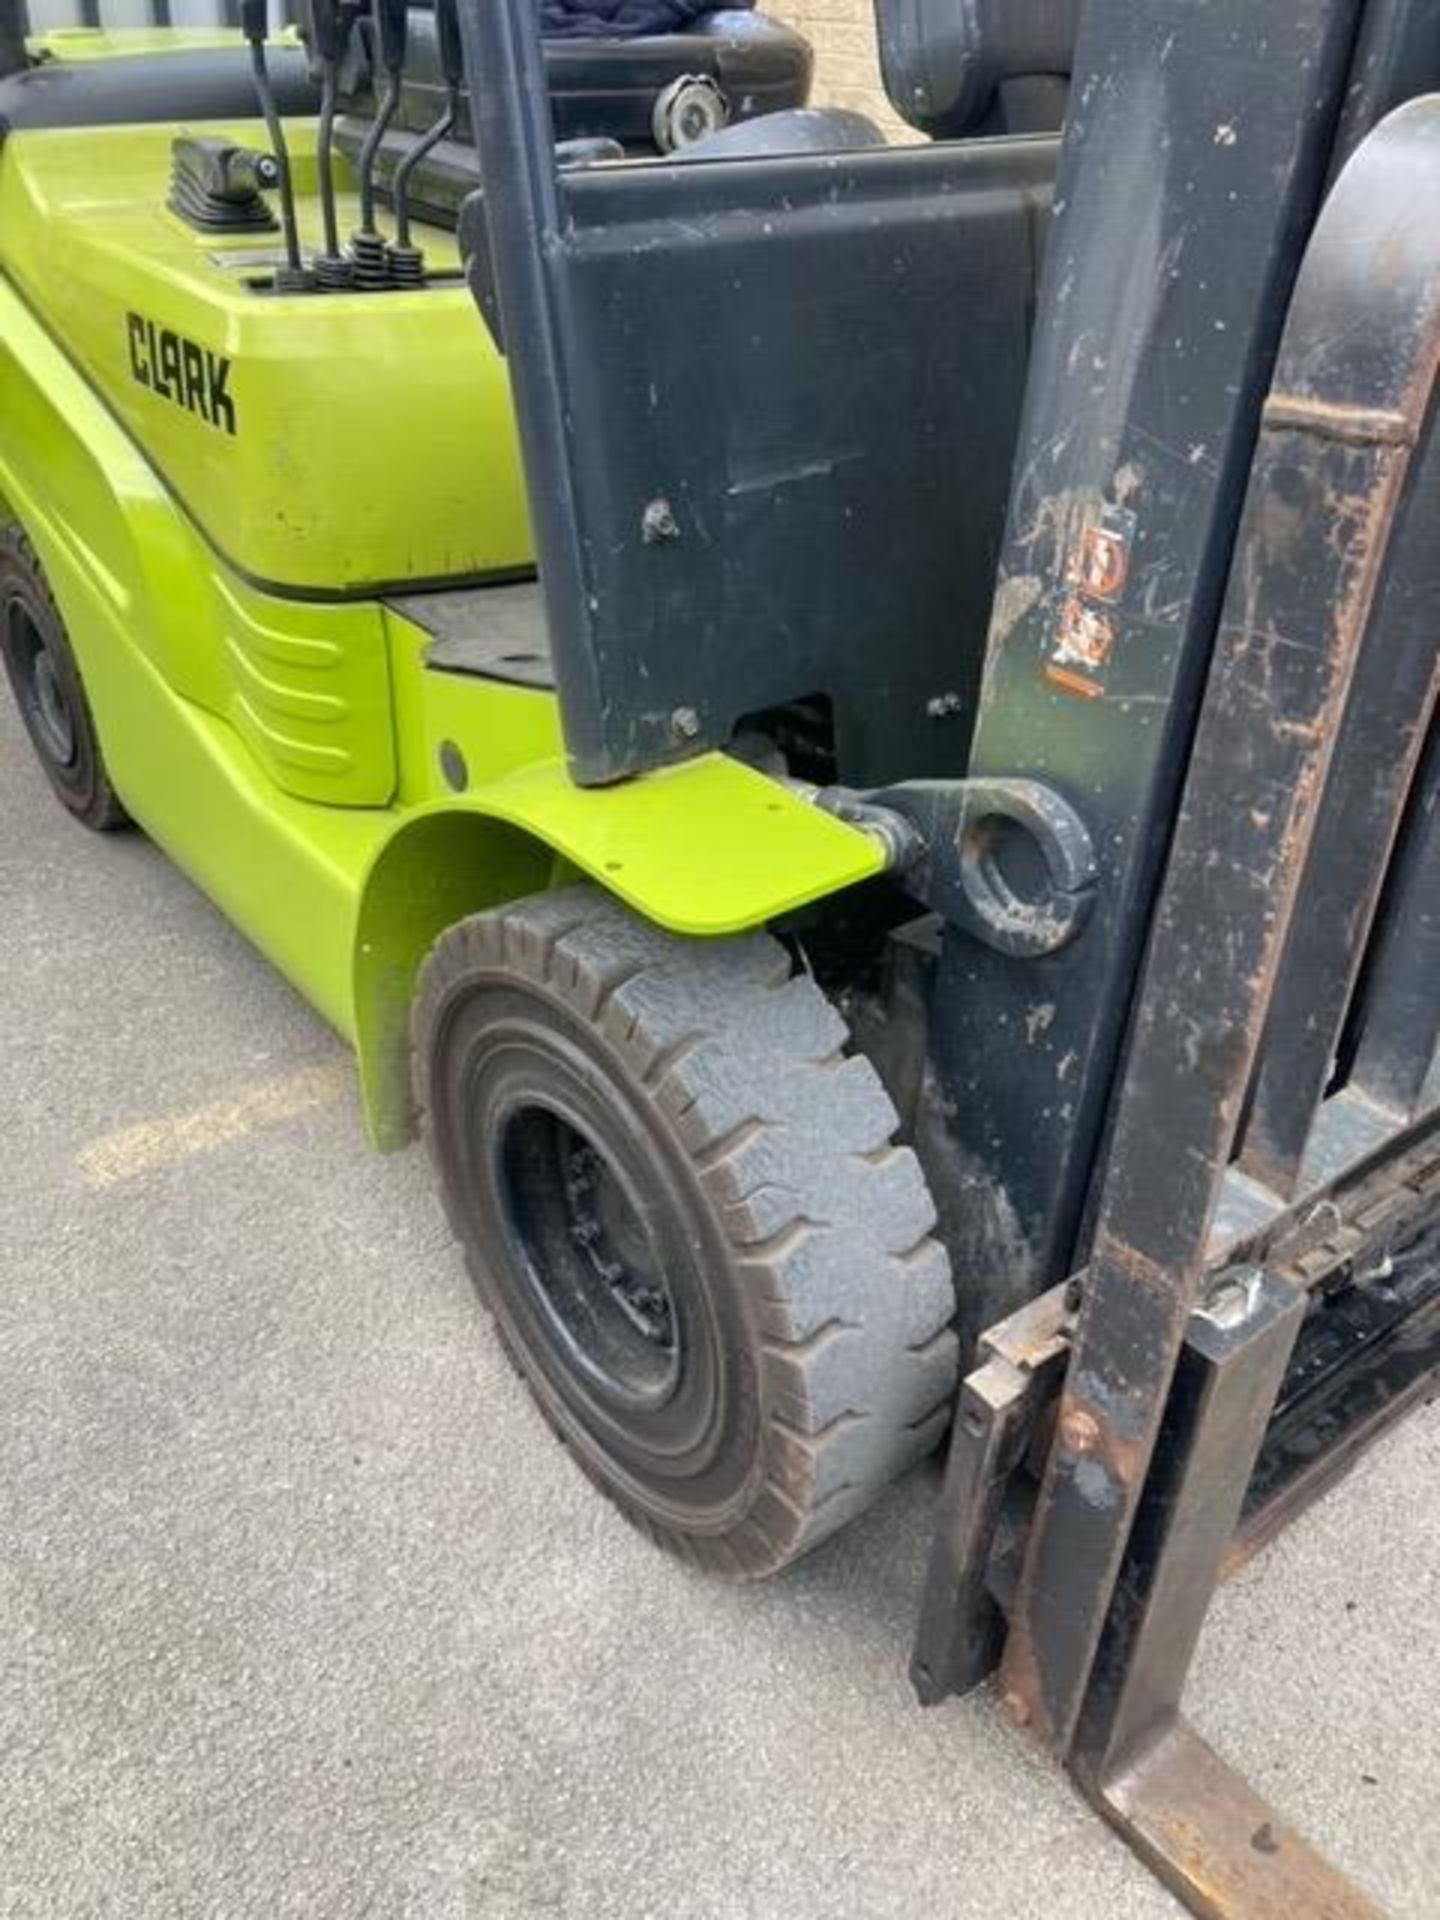 Clark GTS325D diesel Forklift Truck, year 2018, 25 - Image 10 of 23